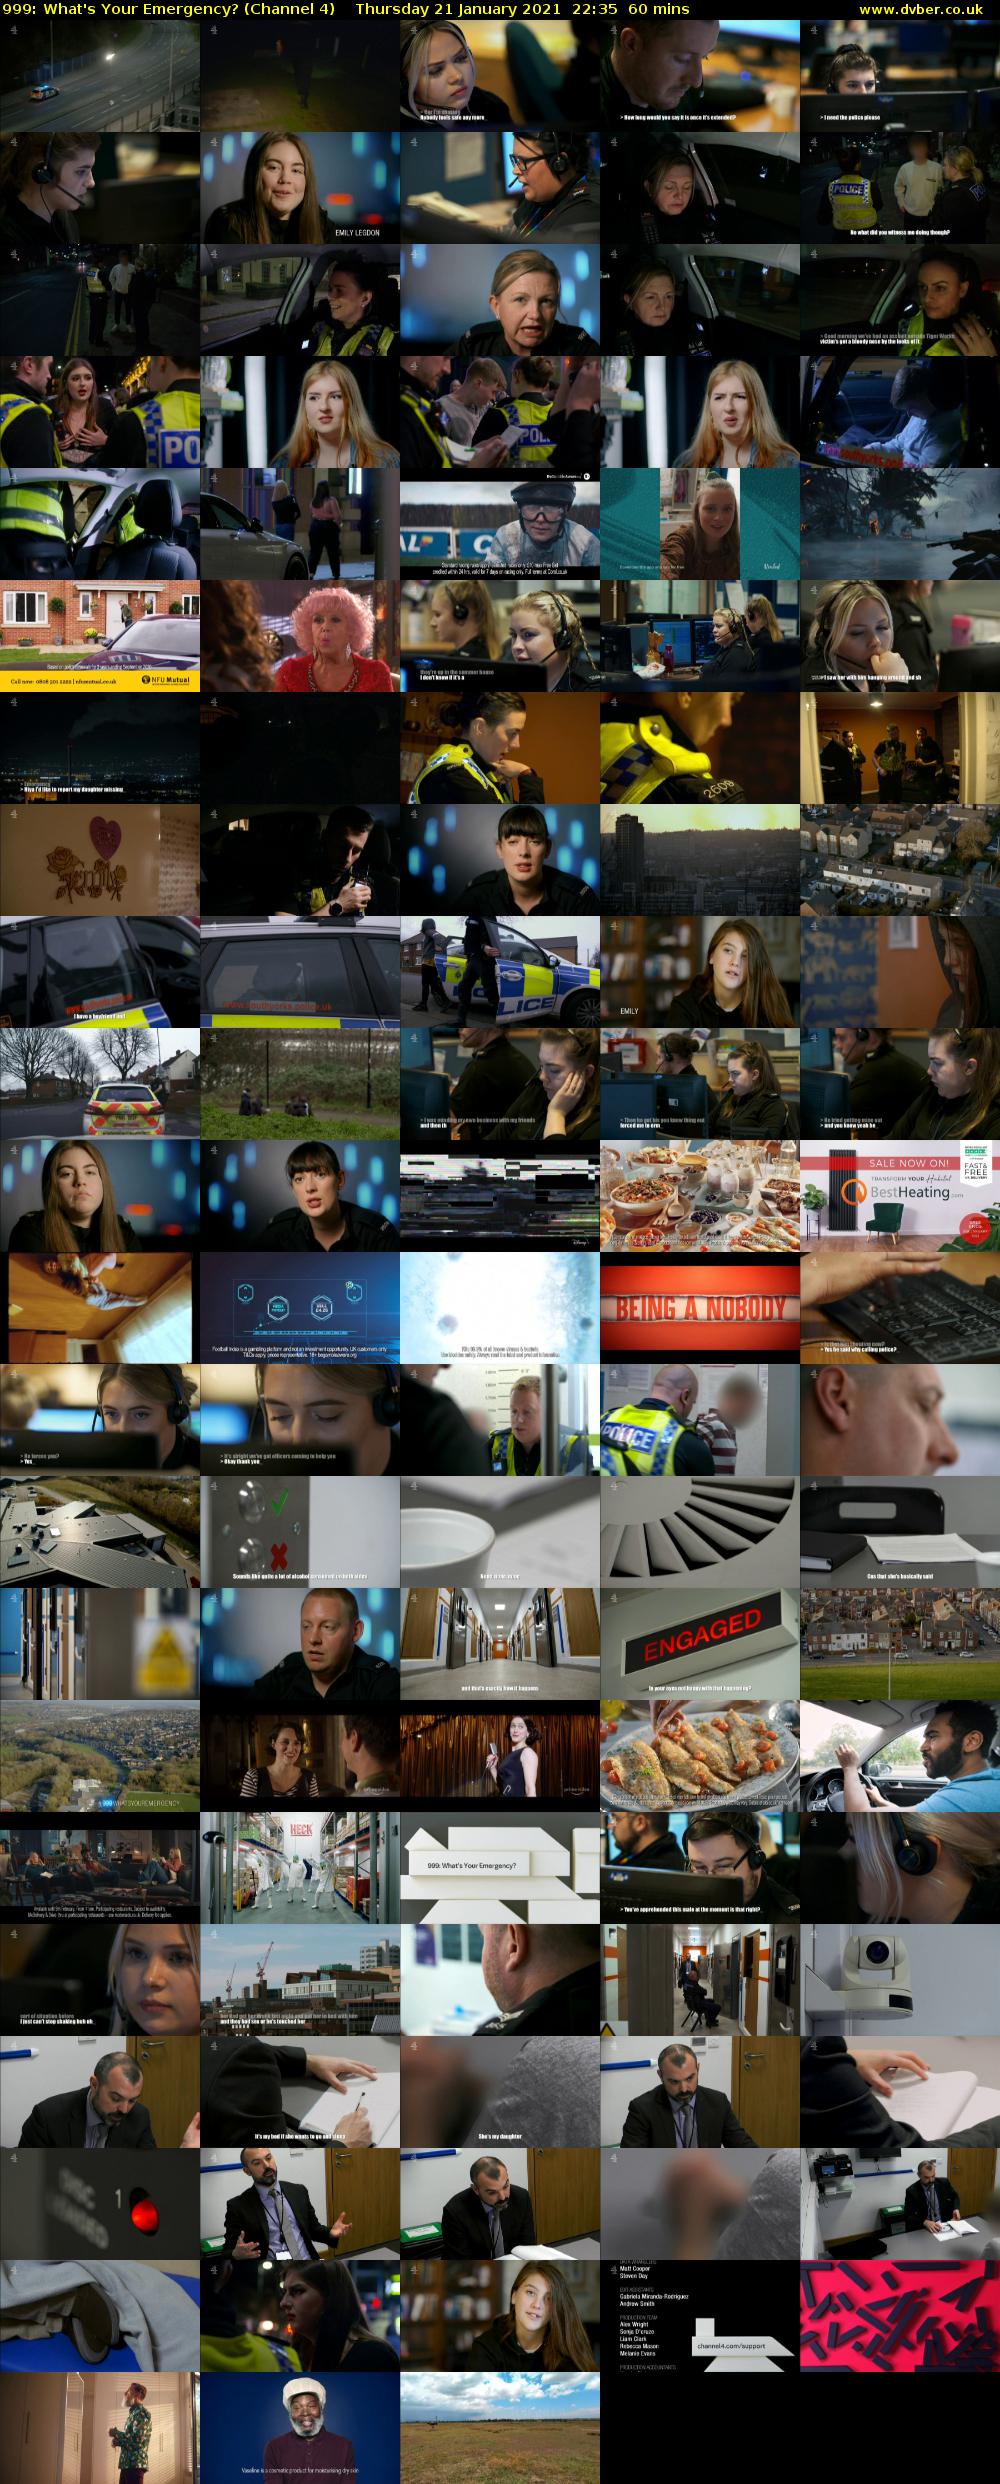 999: What's Your Emergency? (Channel 4) Thursday 21 January 2021 22:35 - 23:35